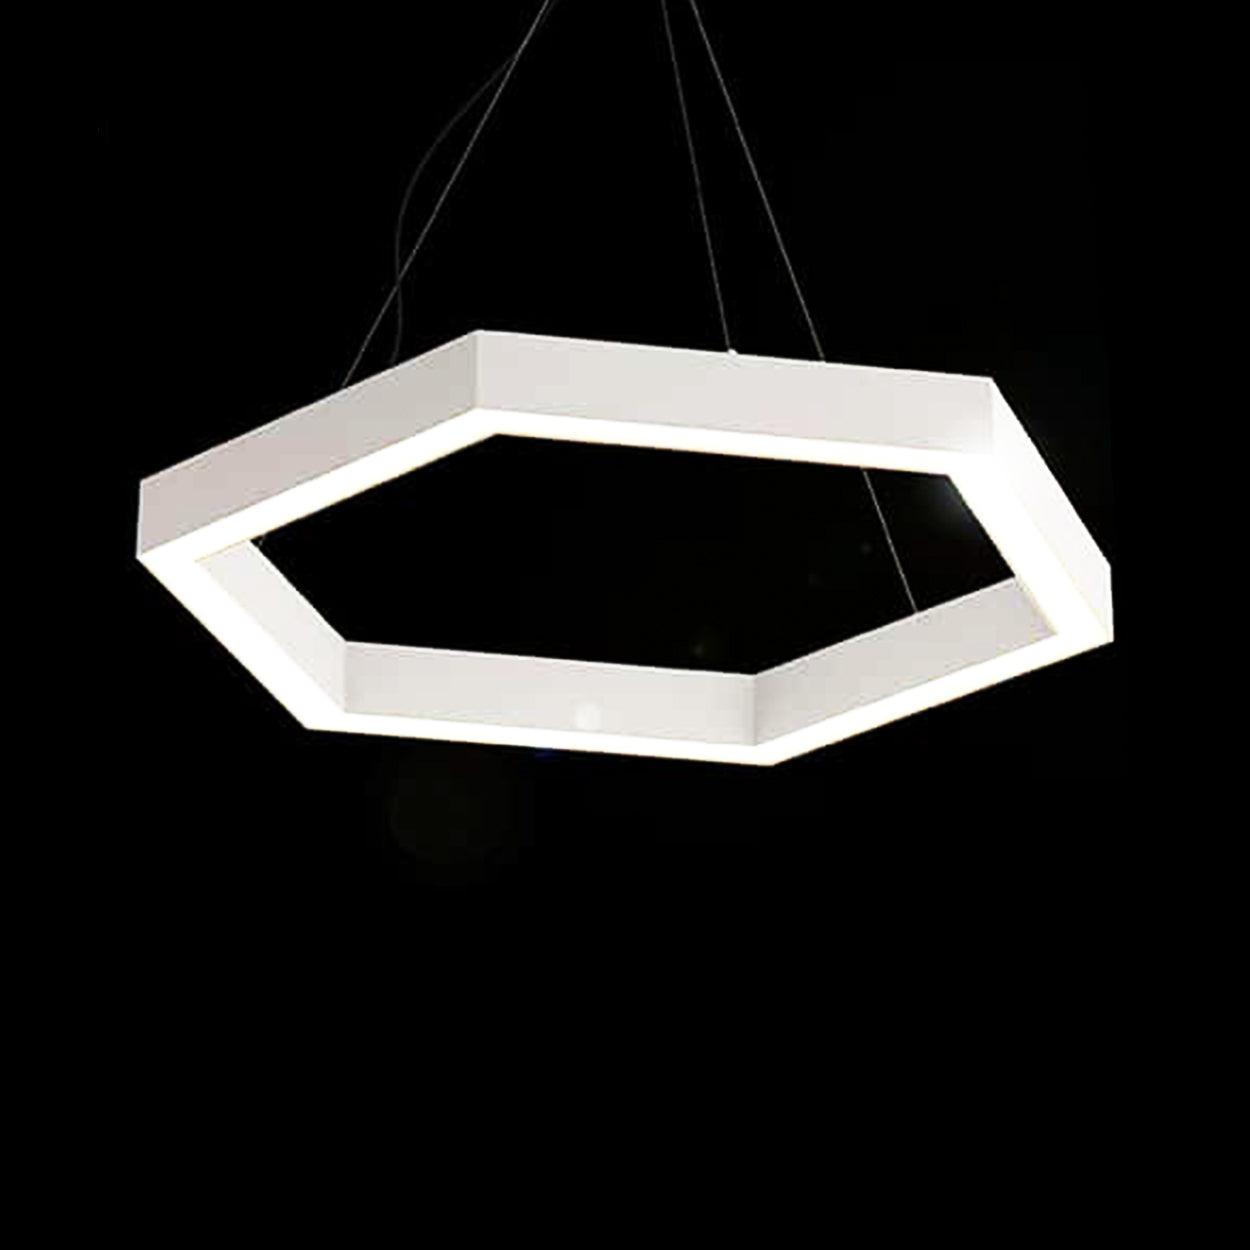 ANKUR GEOM HEXAGON LED PENDANT LIGHT at the lowest price in India.